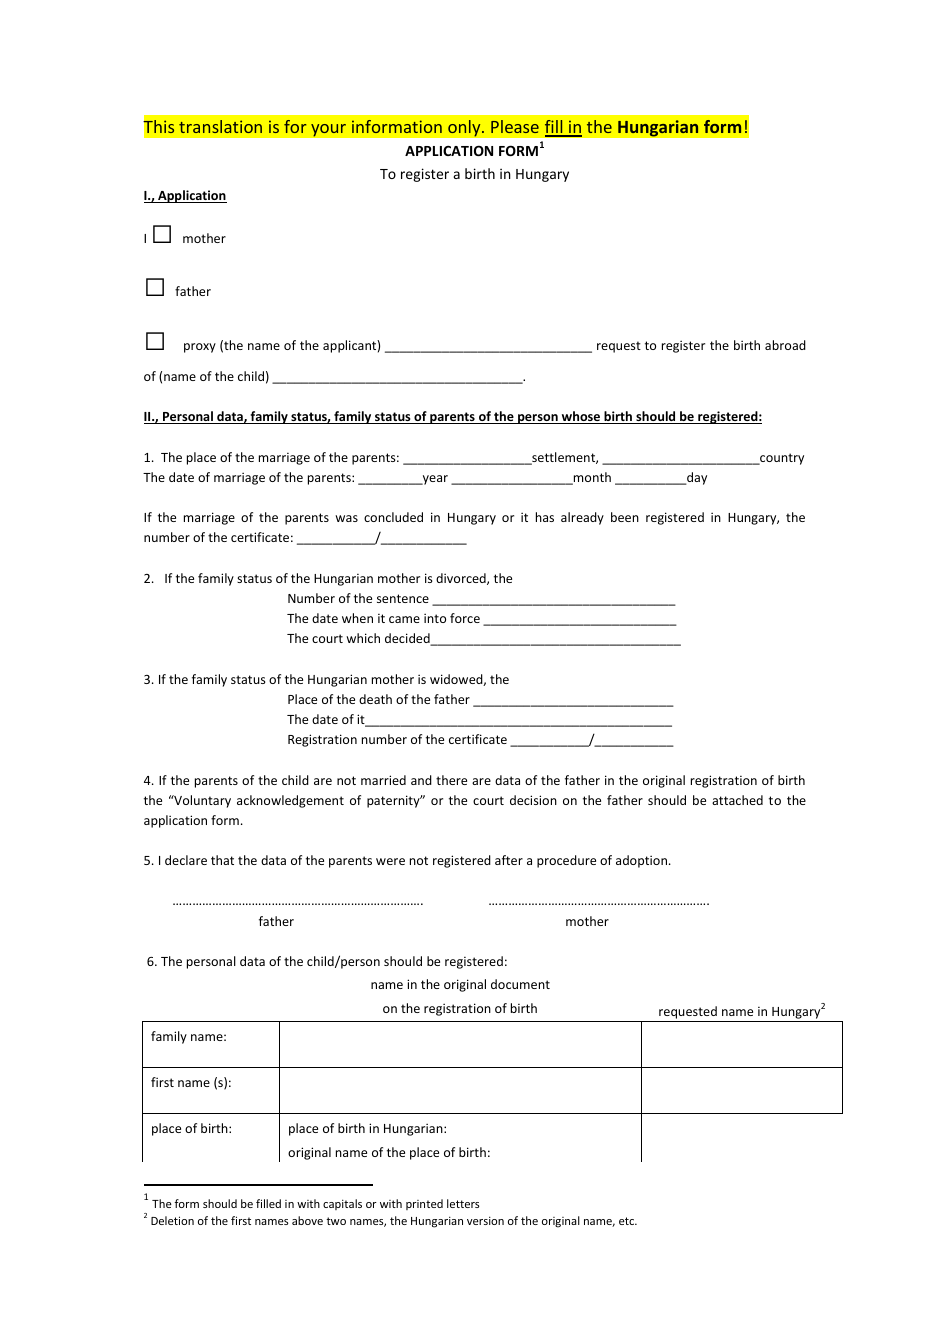 Application Form to Register a Birth in Hungary - Hungary, Page 1